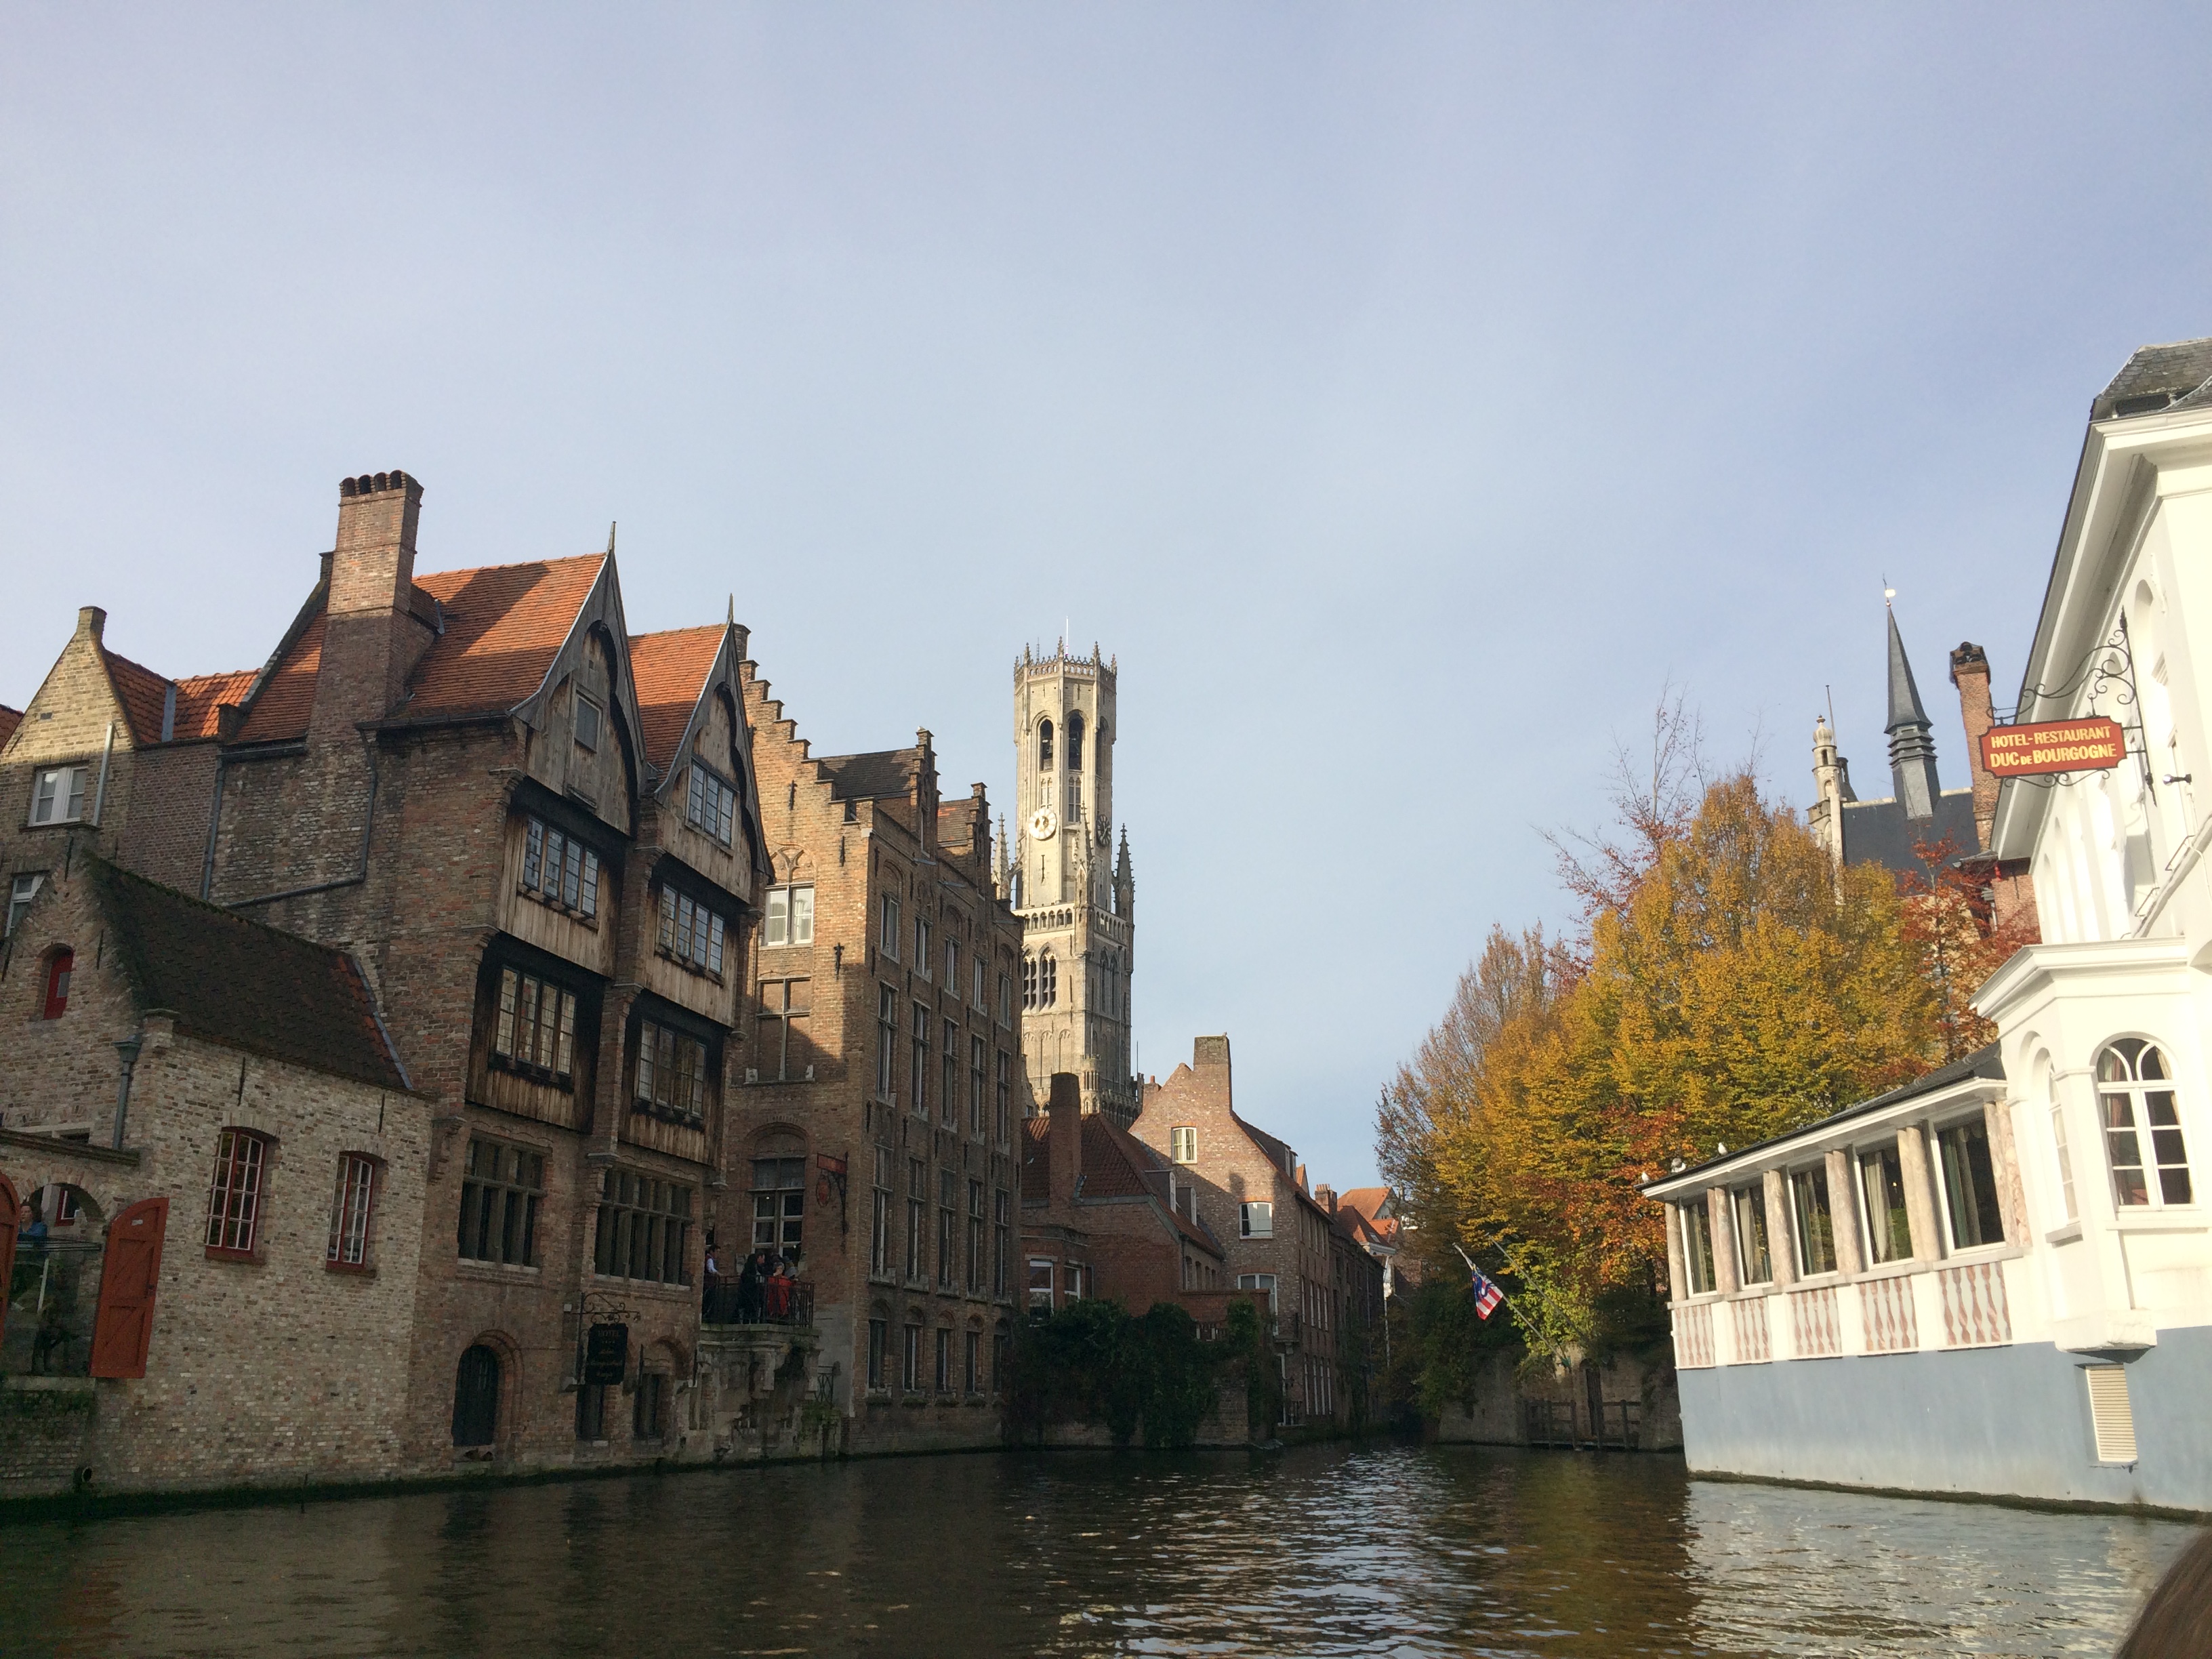 A stunning view from the Canal Boat, you can just see the Belfry in the distance, Bruges